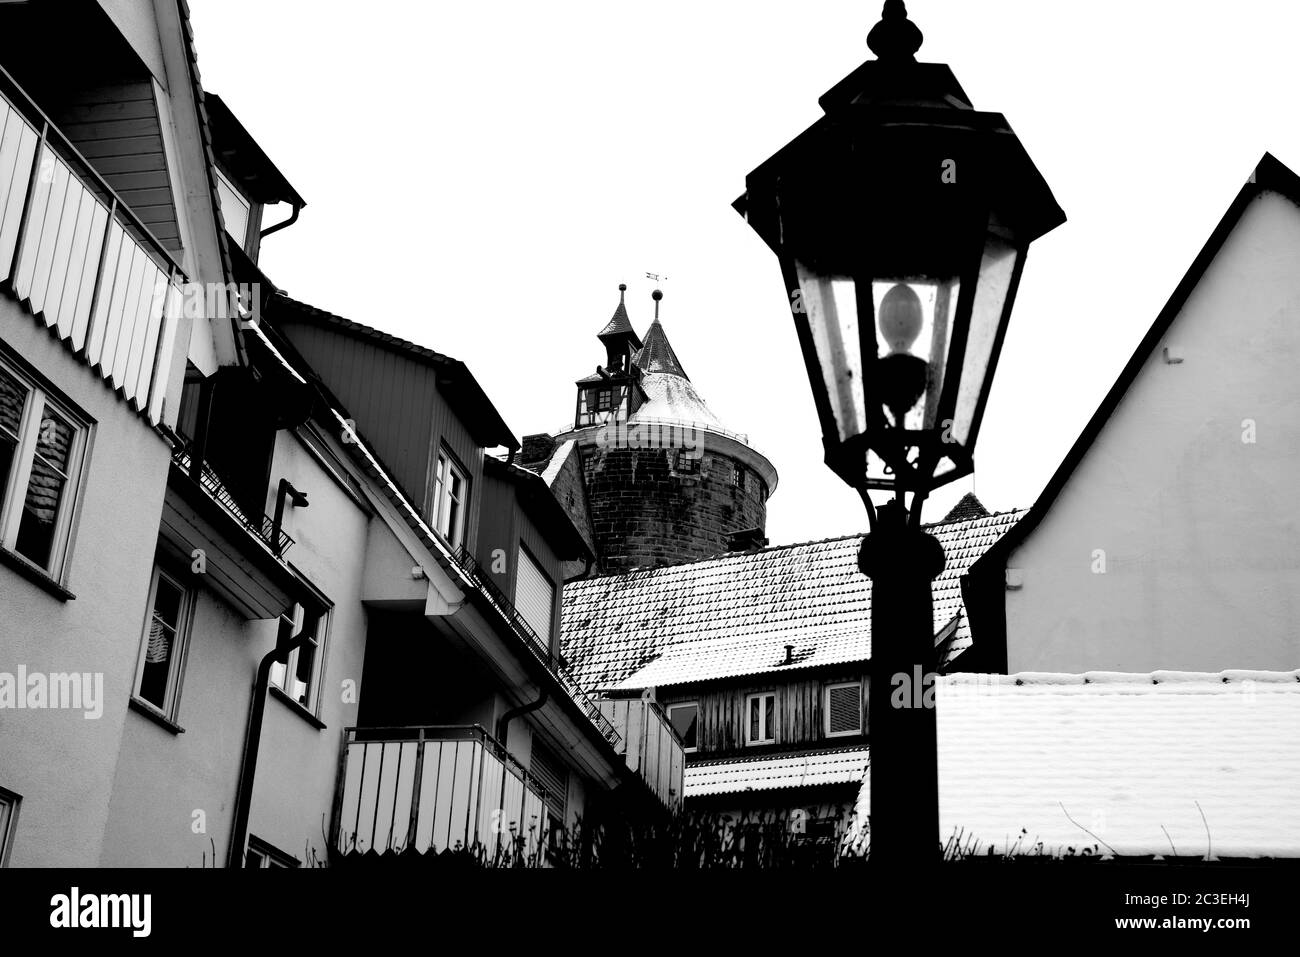 Old town with snow-covered roofs and medieval watchtower in black and white Stock Photo